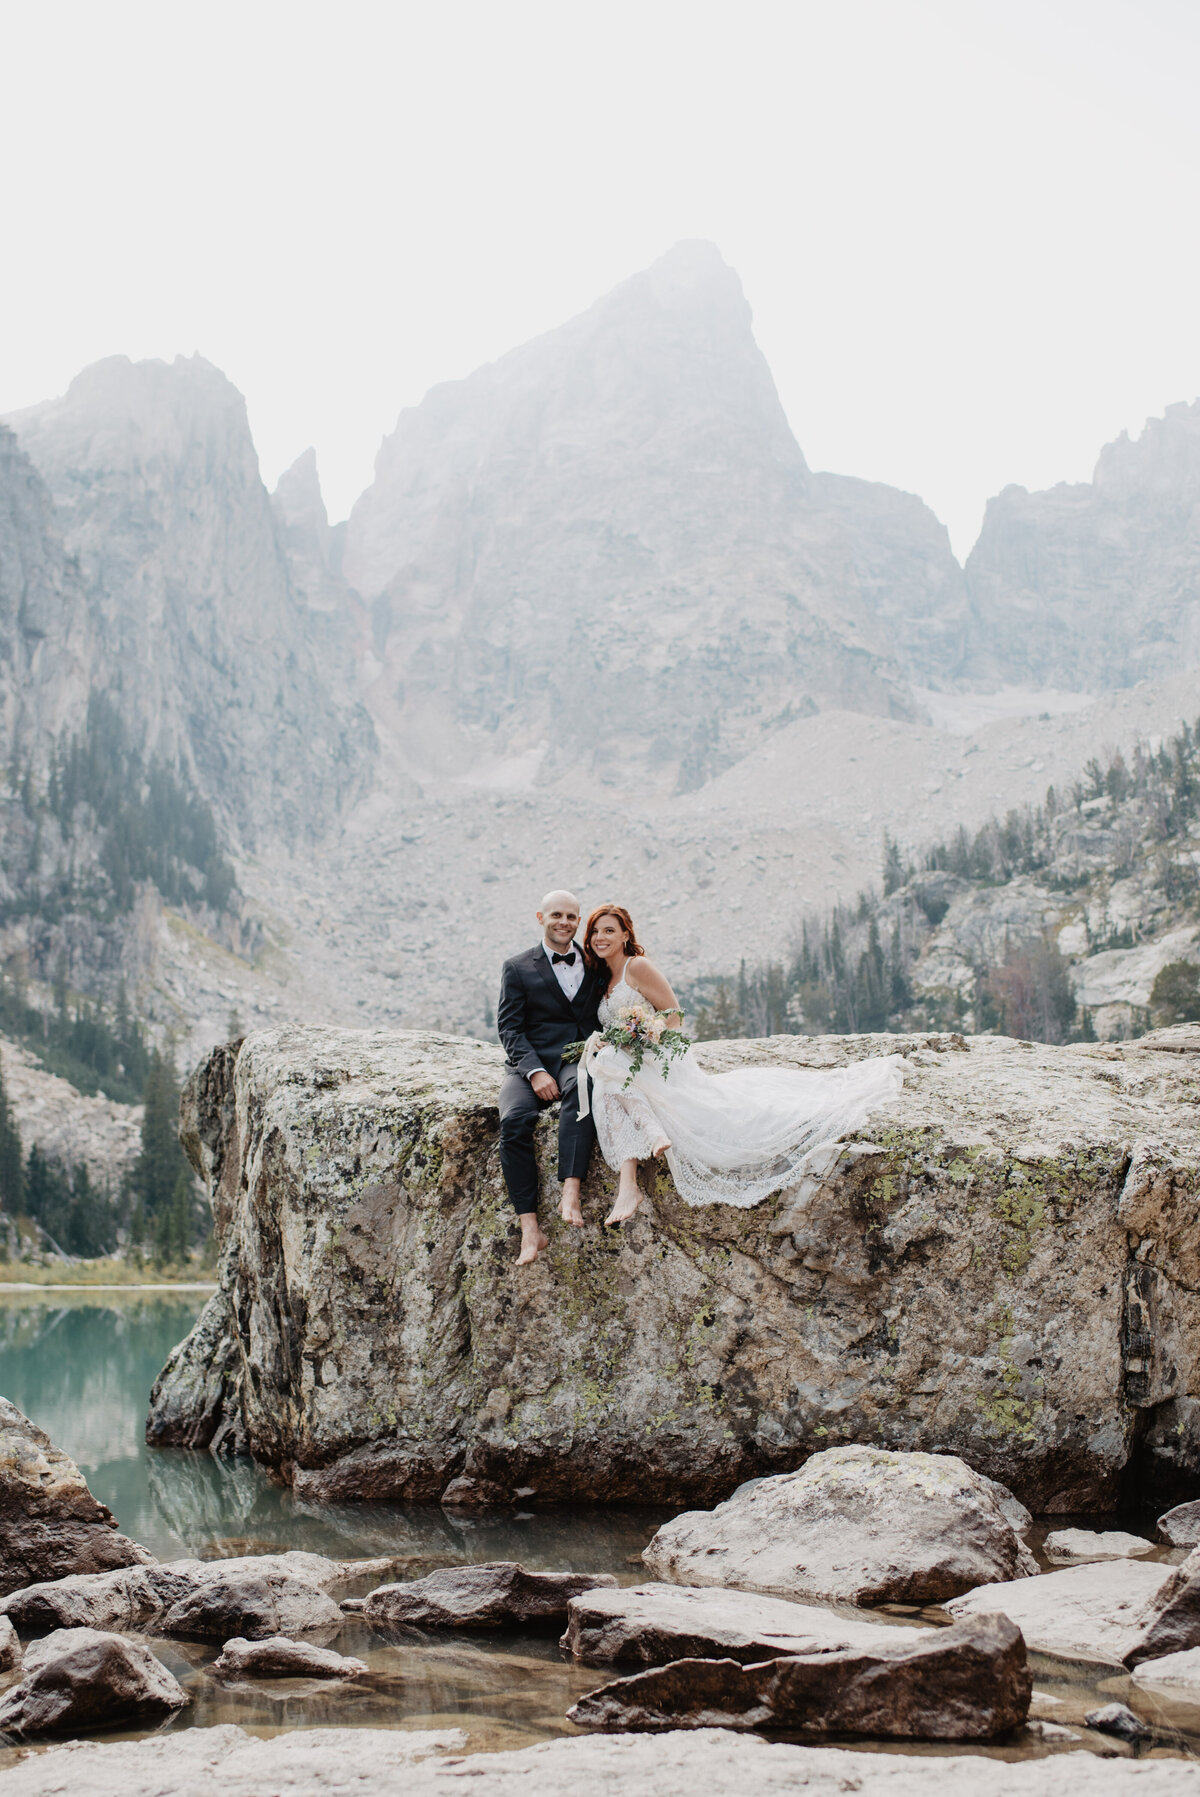 Jackson Hole Photographers capture bride and groom sitting together on rock after Grand Tetons wedding